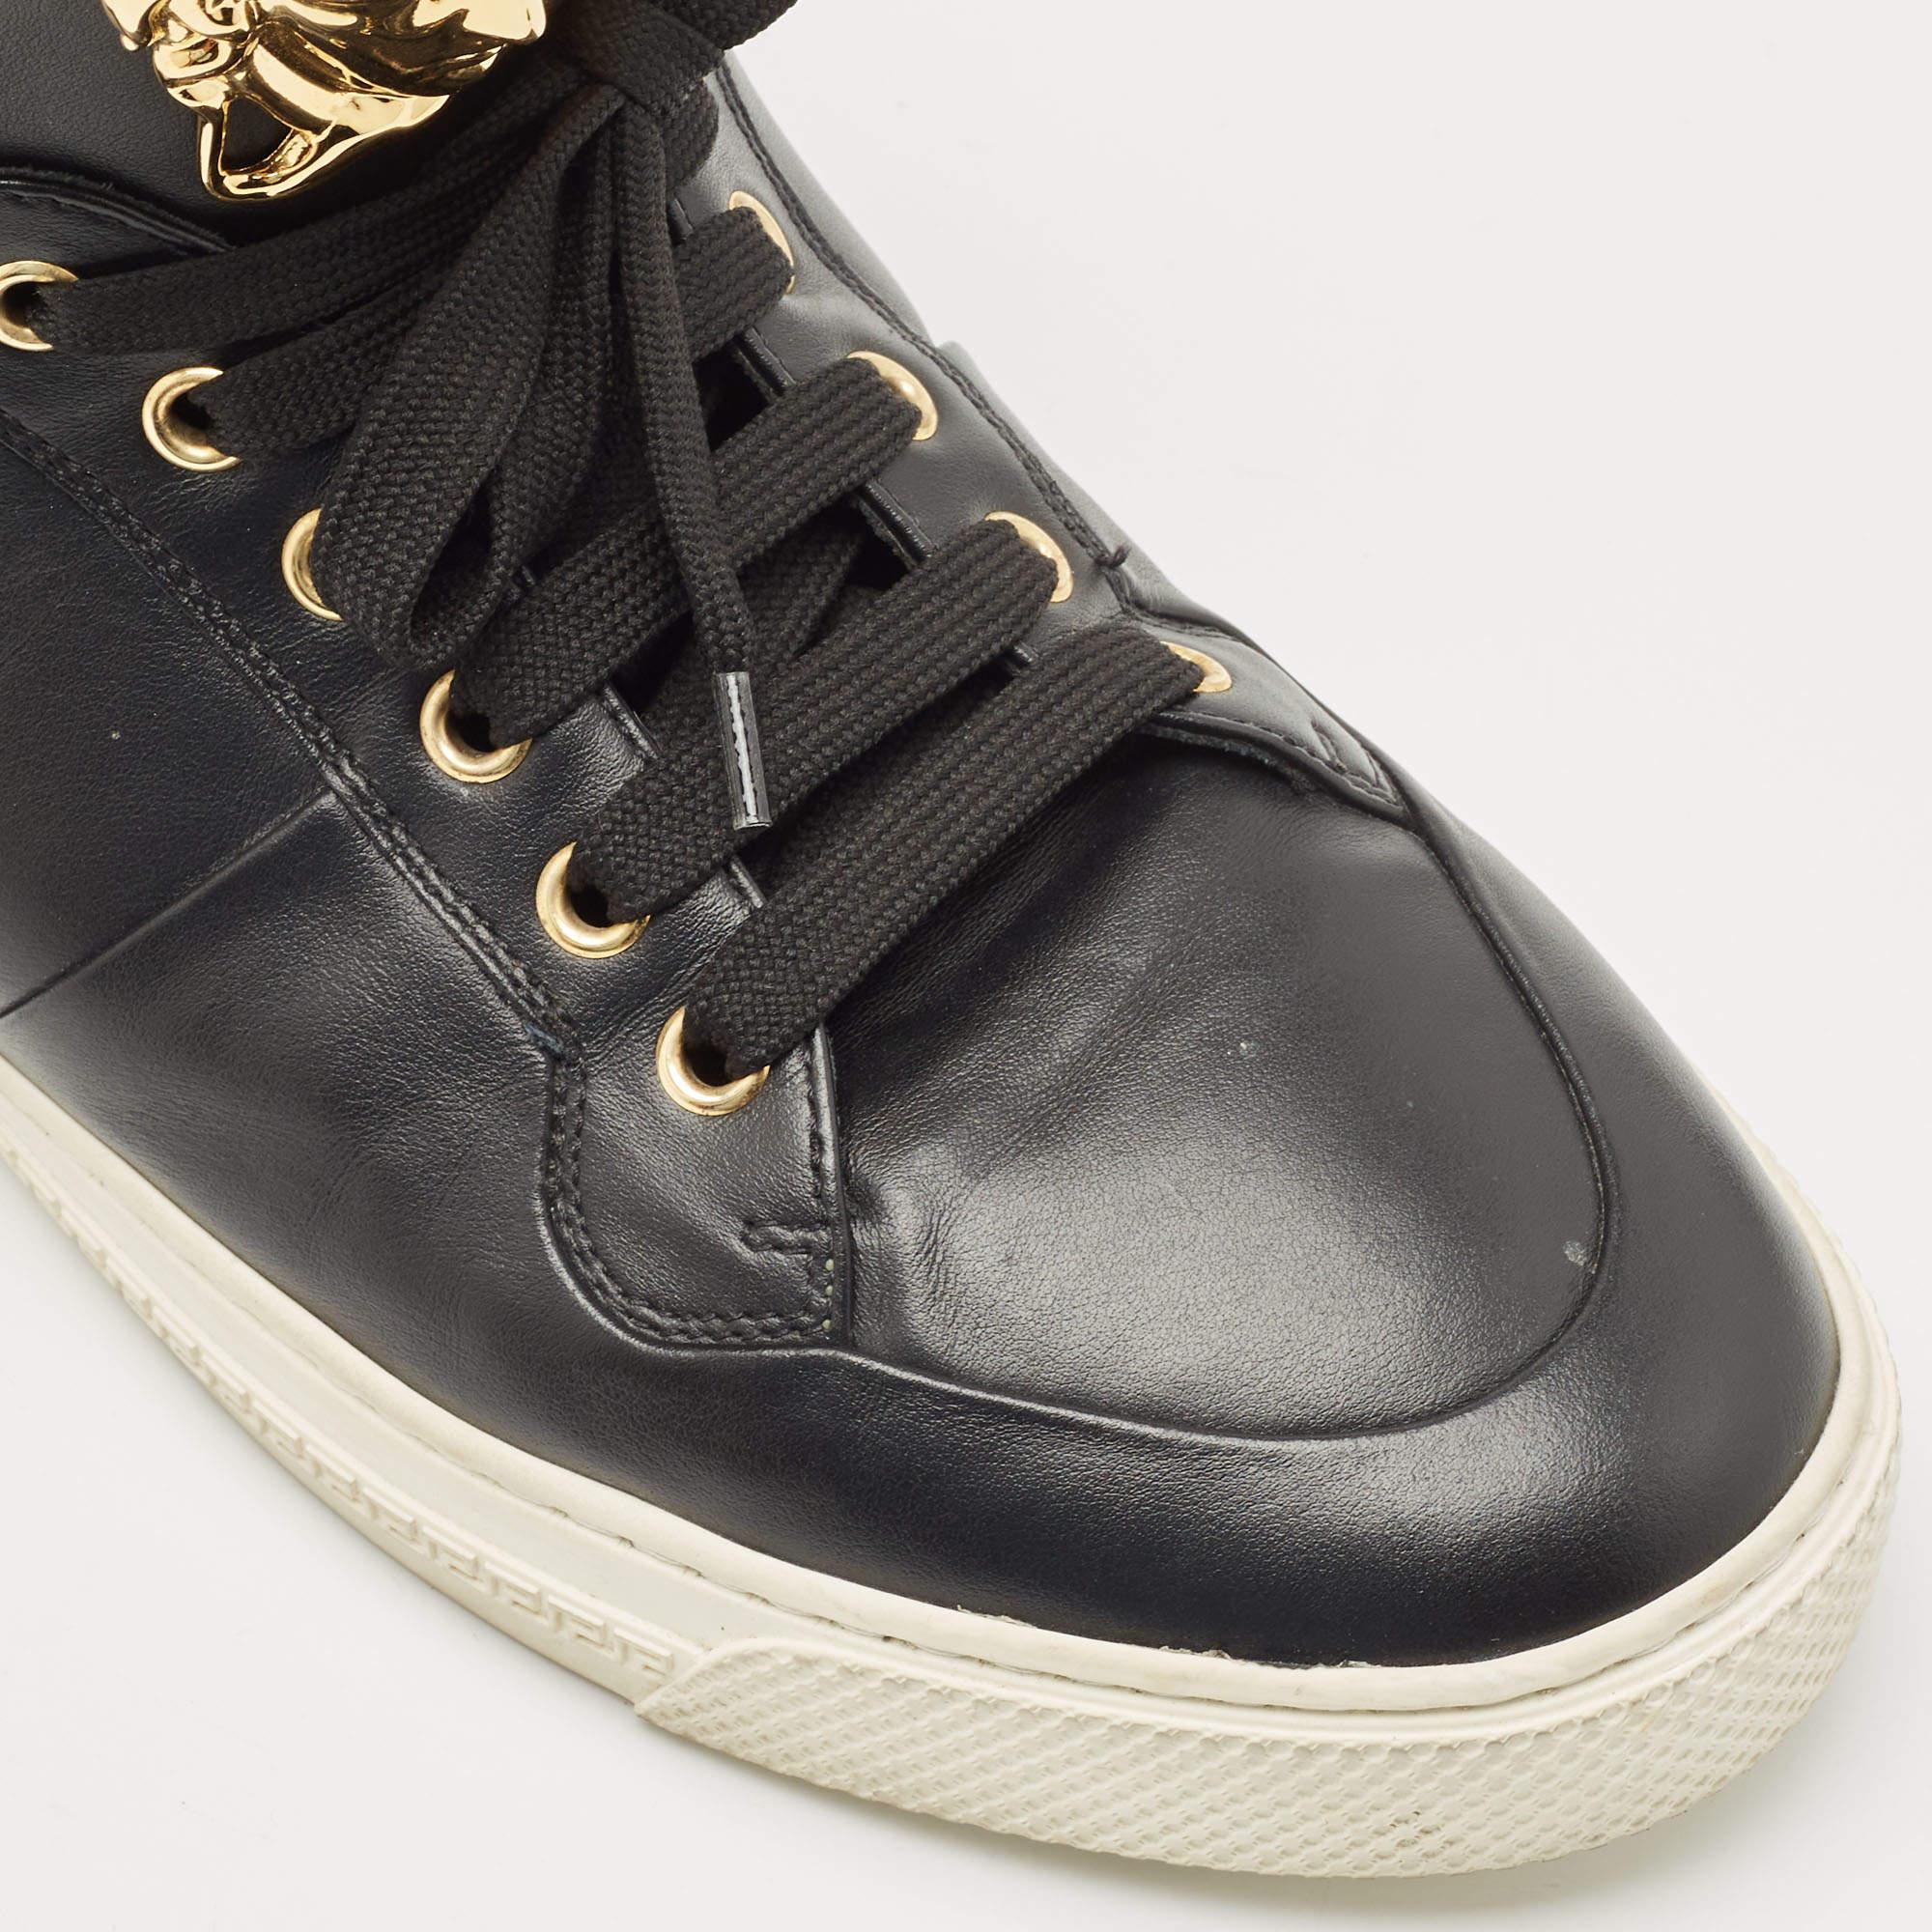 Versace Black Leather Medusa Lace High Top Sneakers Size 42.5 2